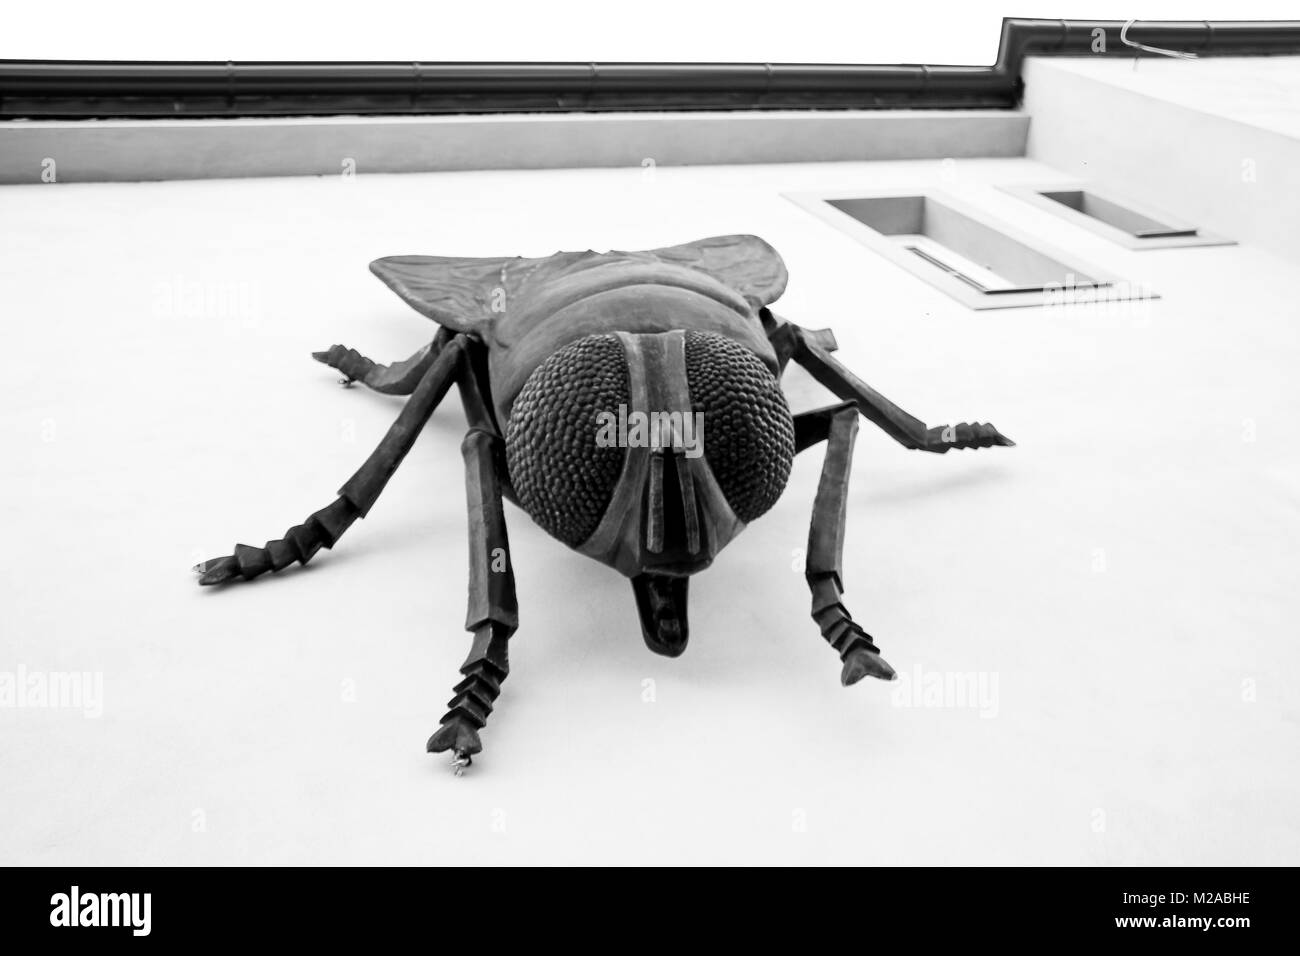 A big statue of the fly is standing on the wall of the house. Looking interesting from this perspective. Stock Photo